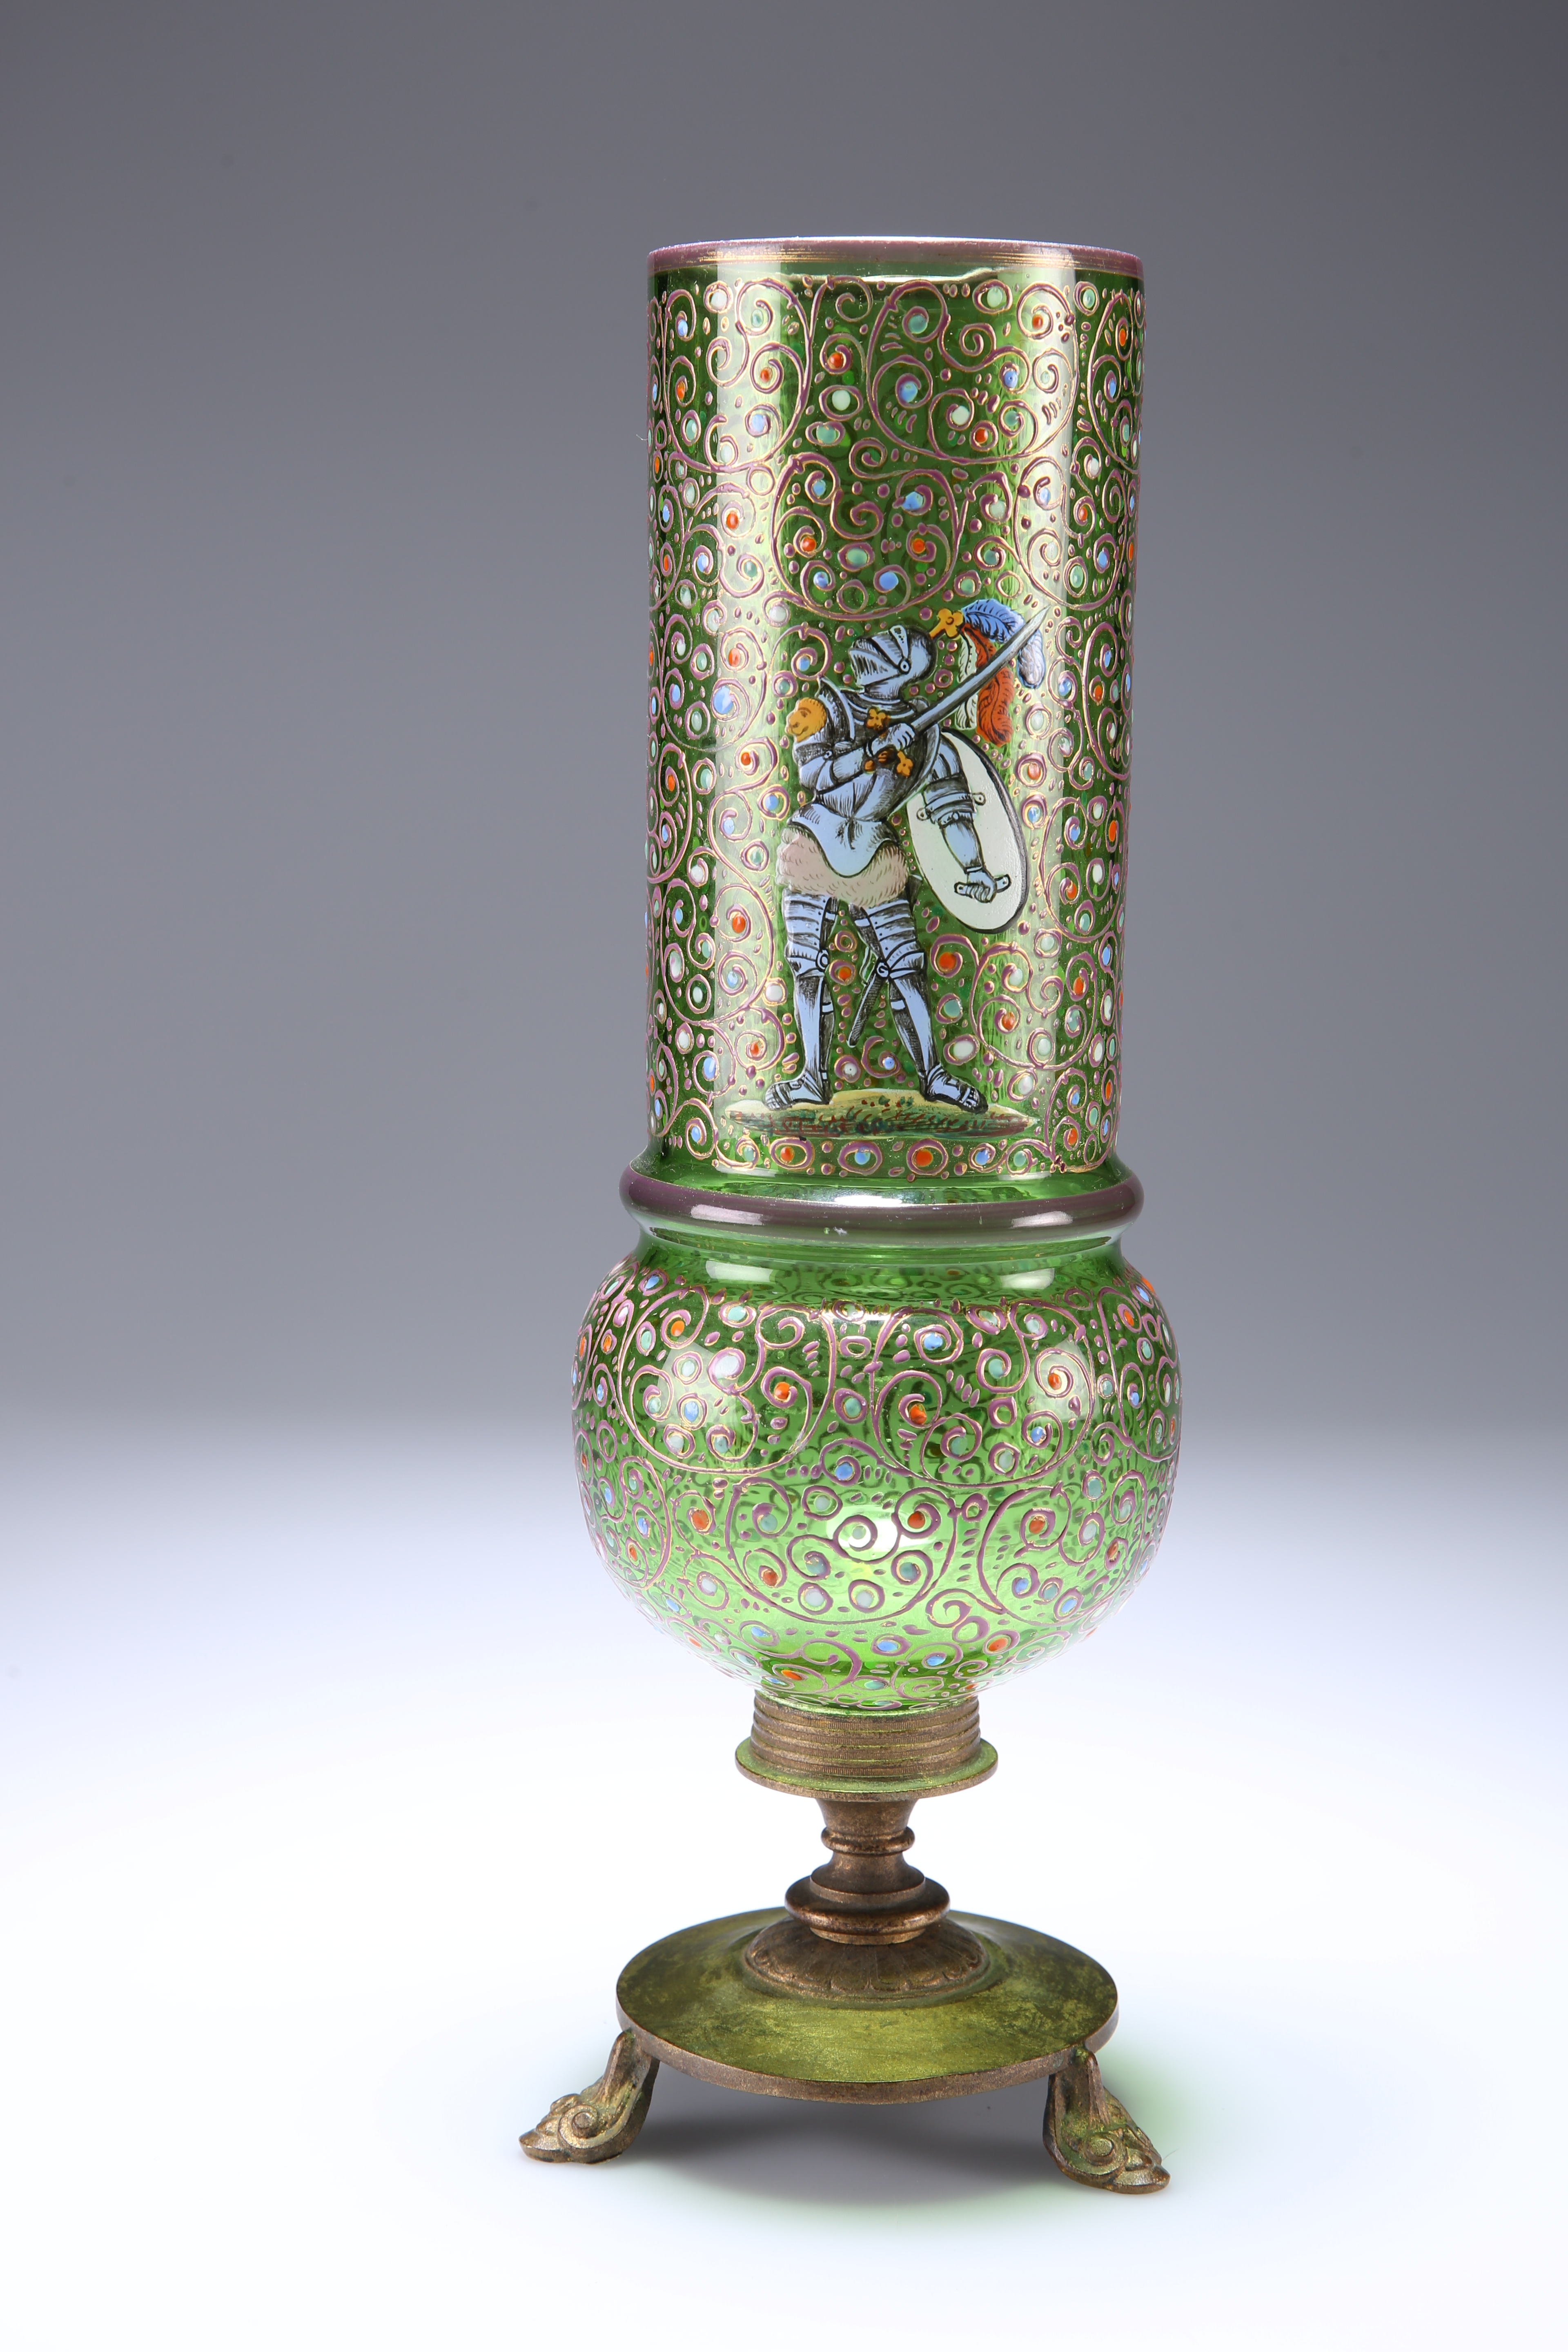 A LATE 19TH CENTURY BOHEMIAN GLASS VASE